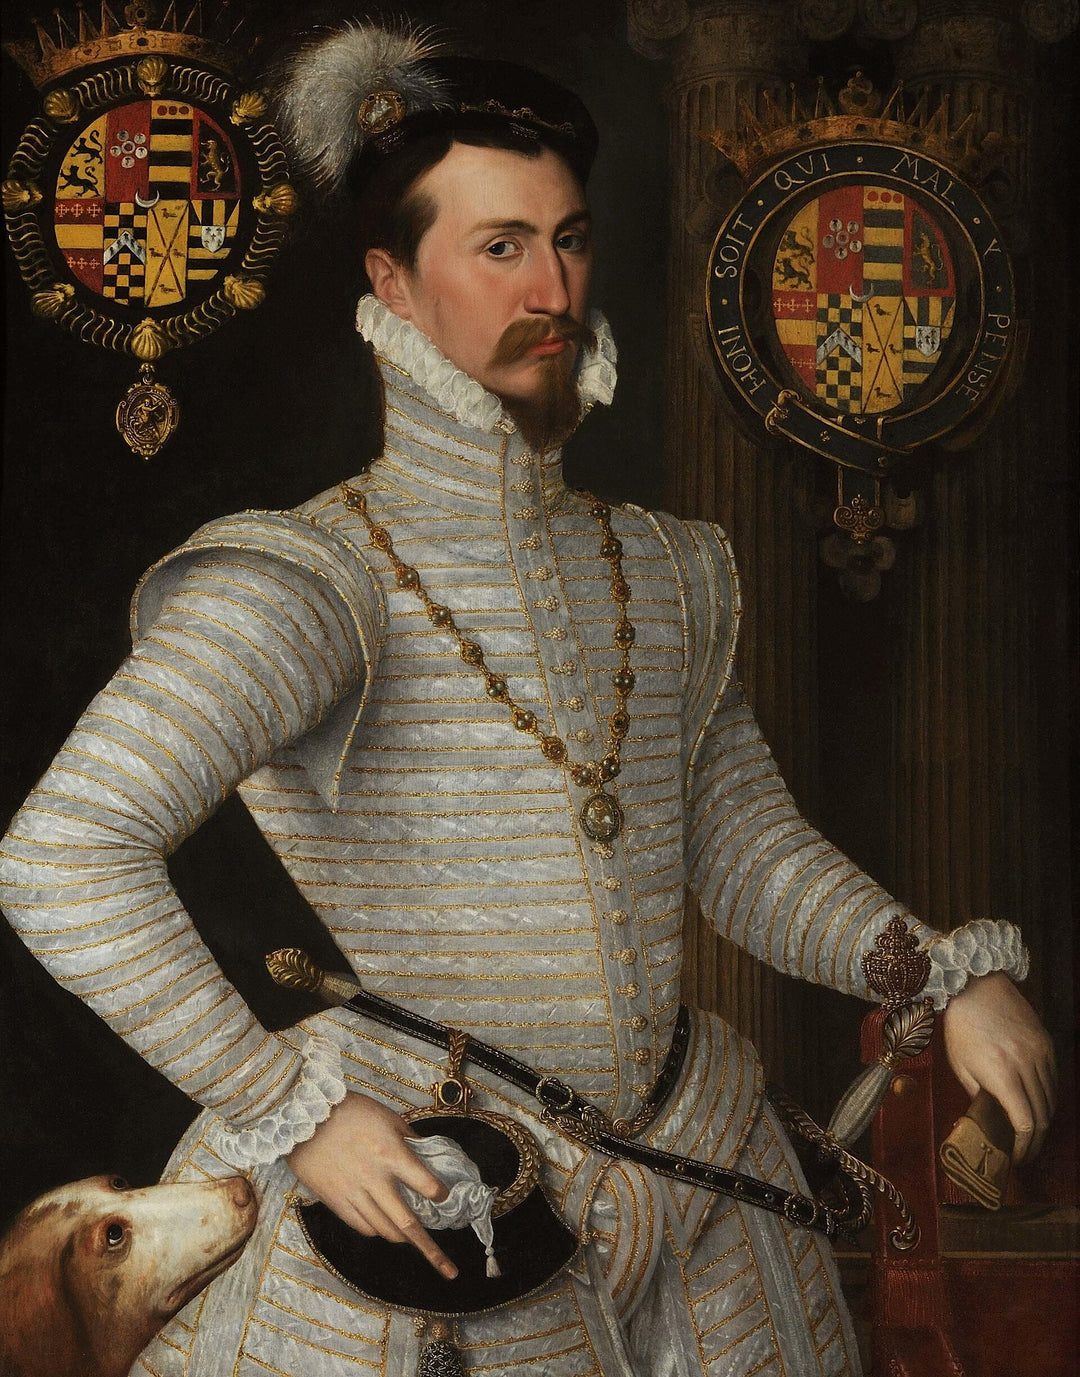 Who was Robert Dudley, the 1st Earl of Leicester?